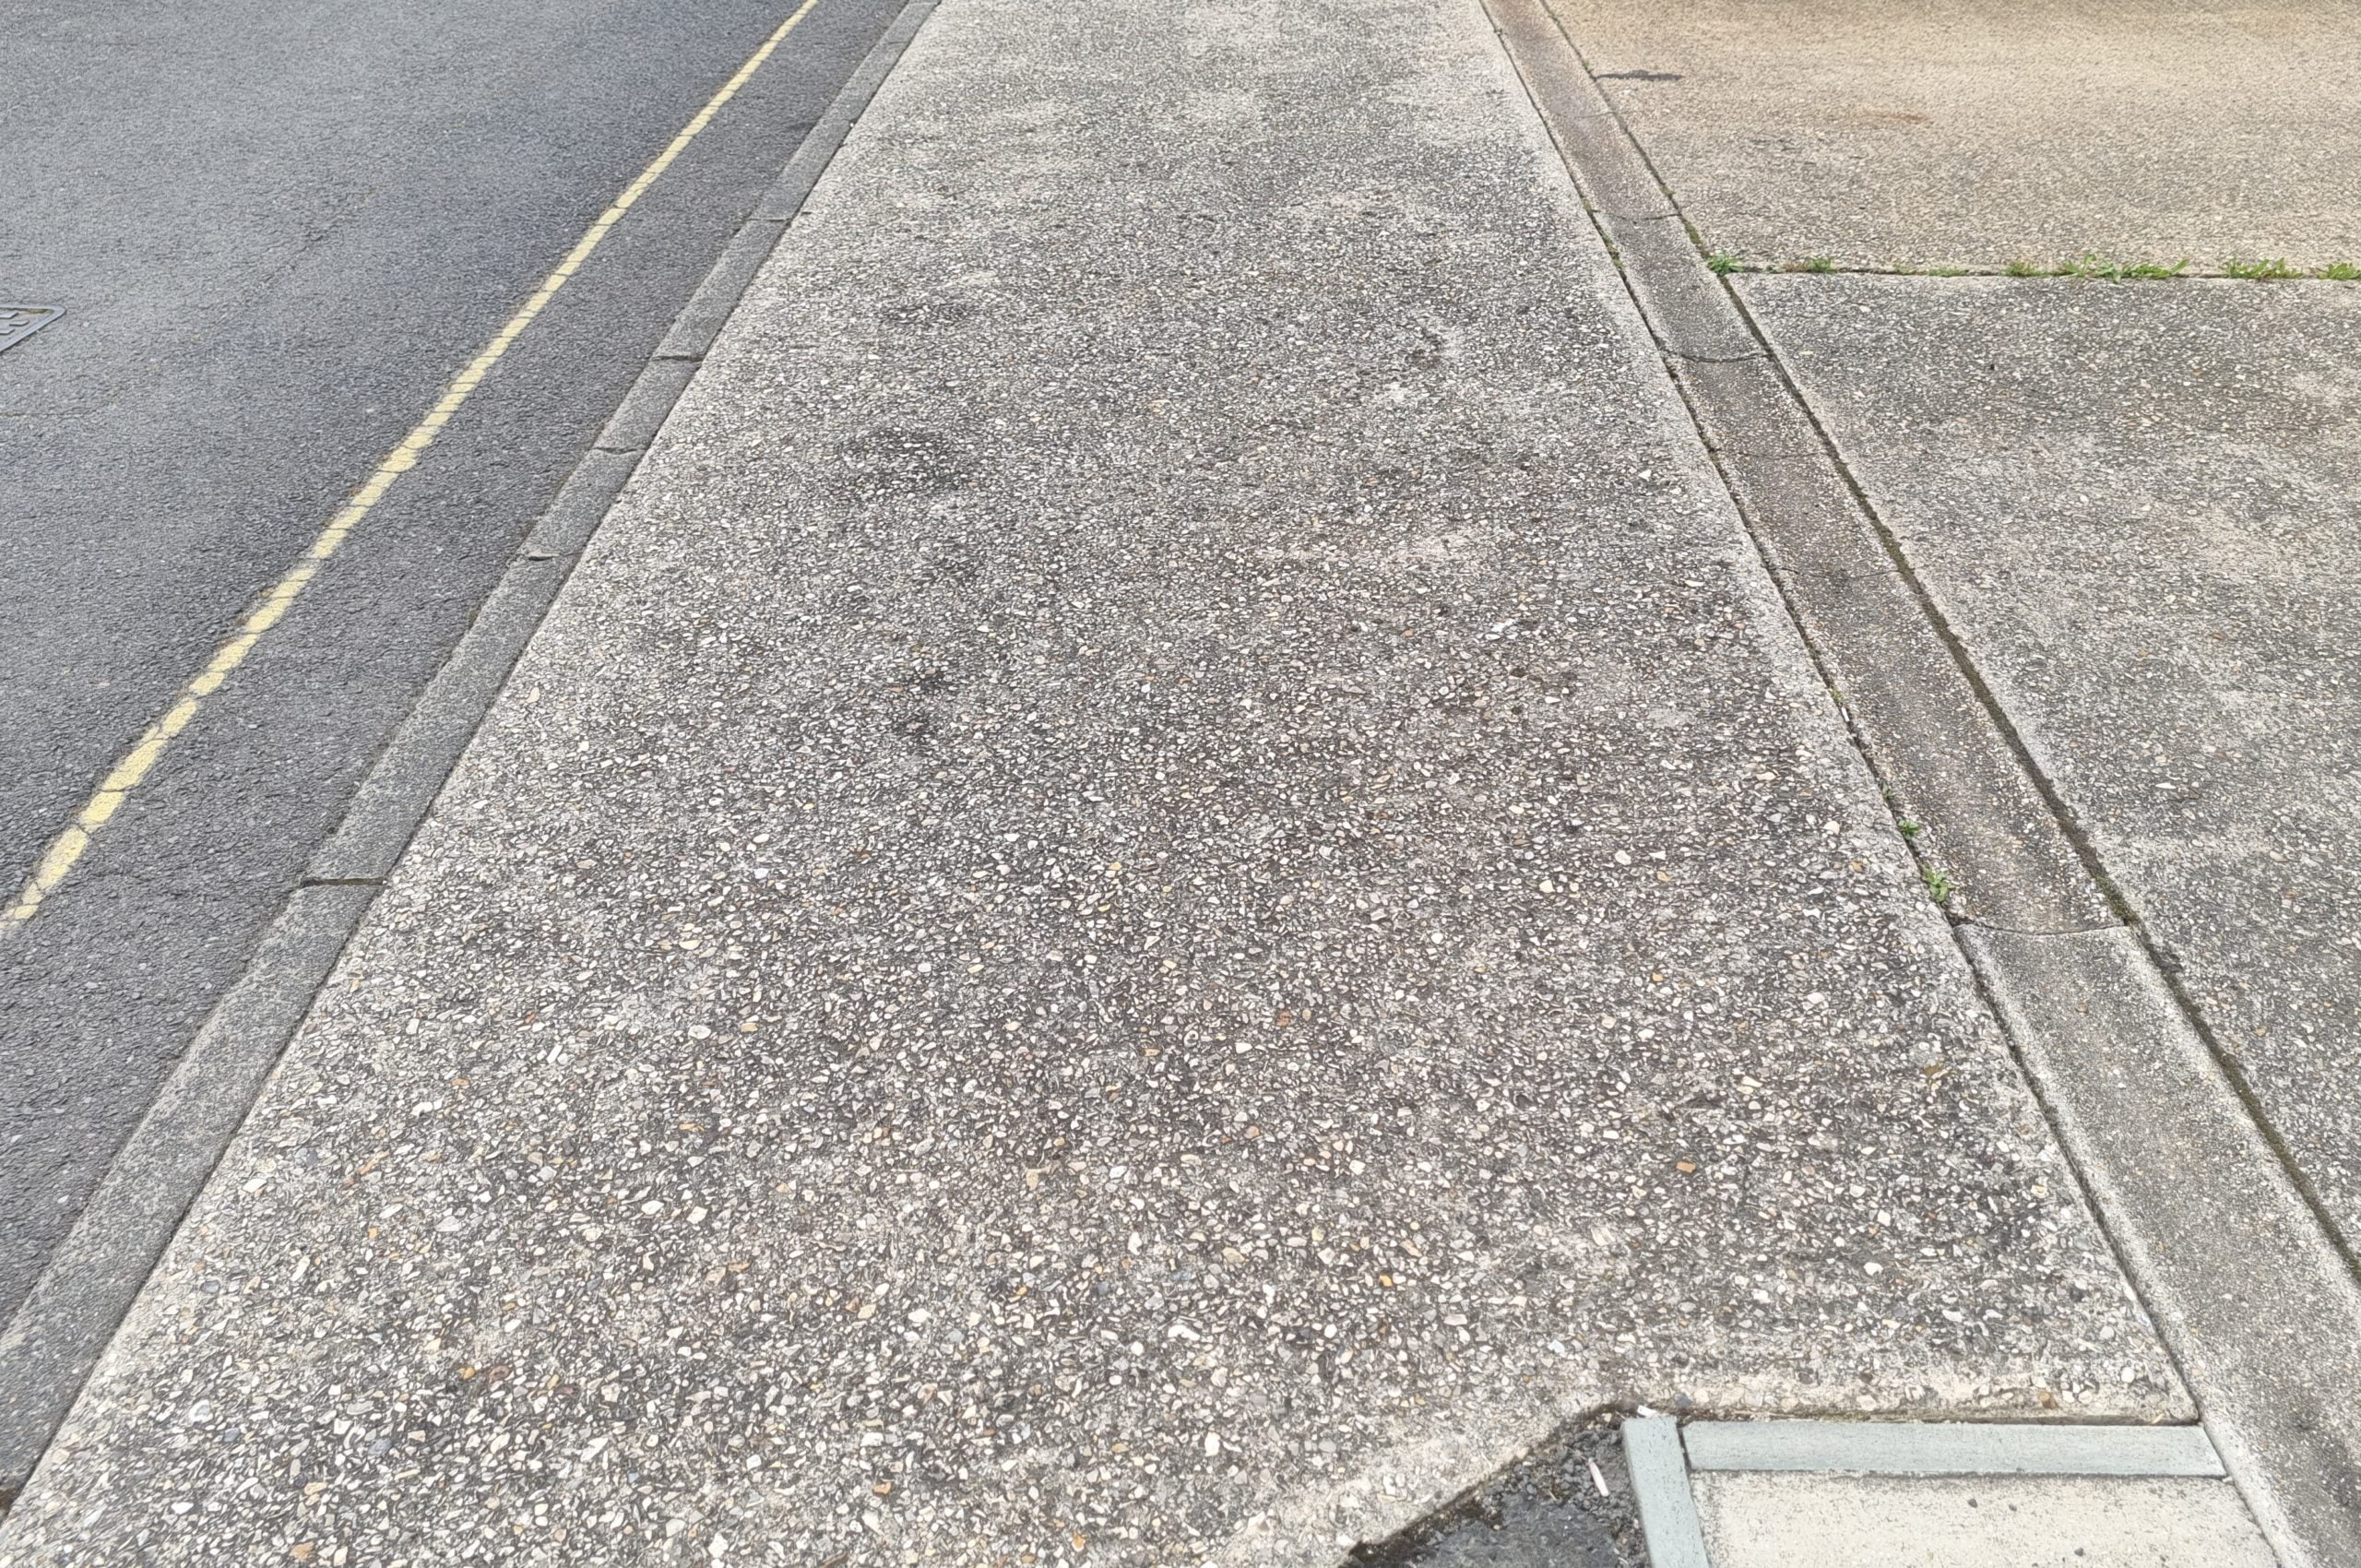 Before driveway cleaning – Where RJS Waste Management's driveway connects to the road